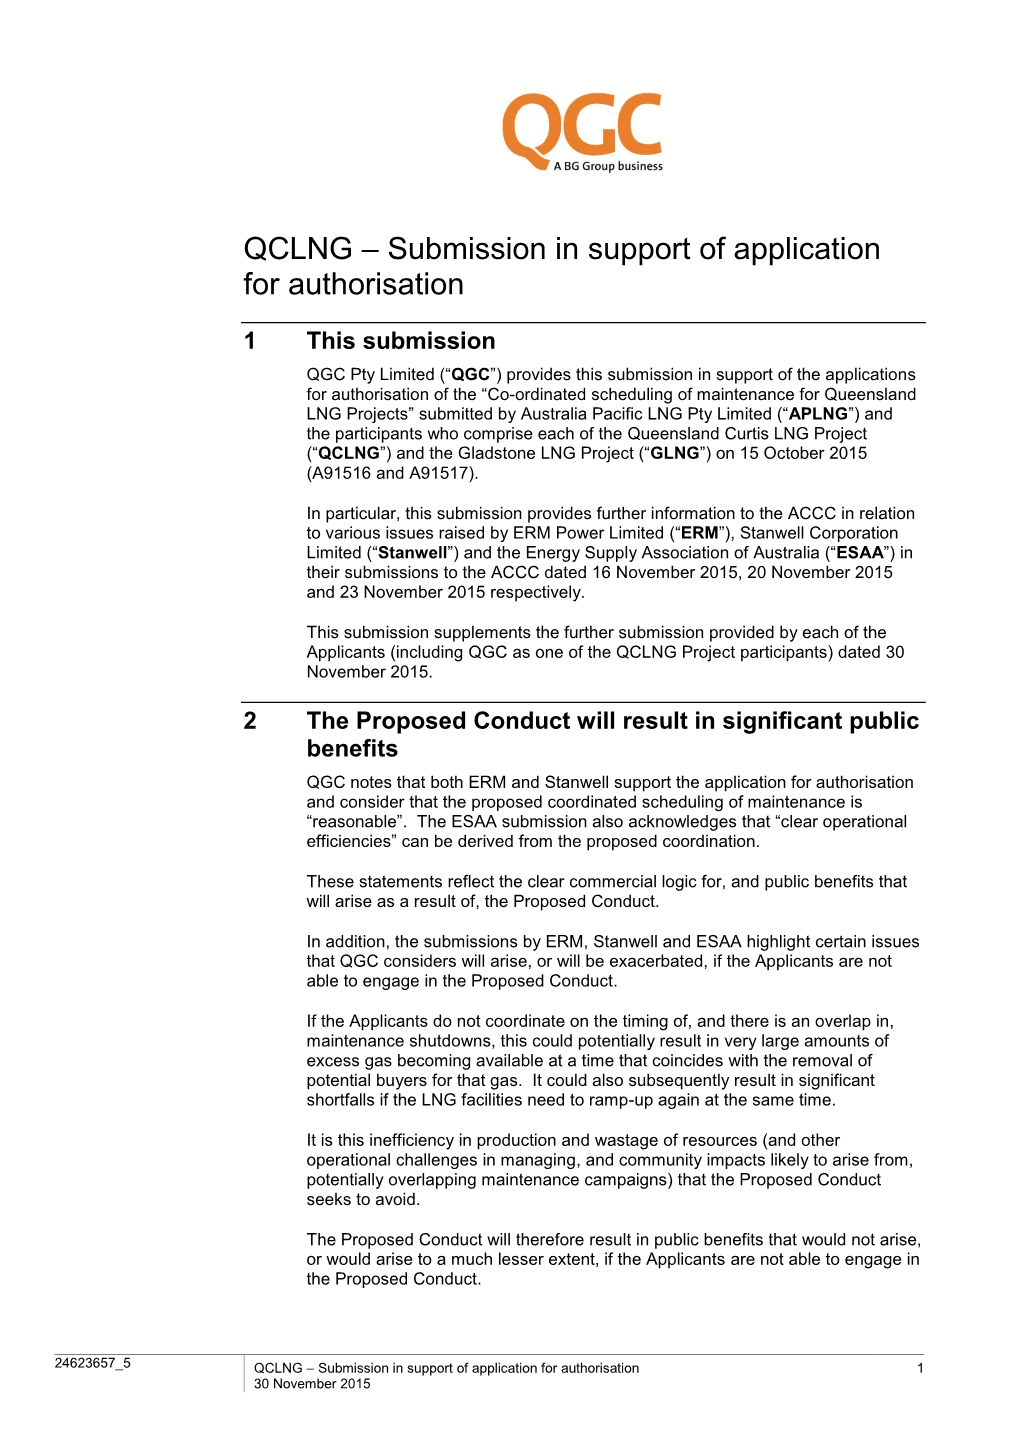 QCLNG – Submission in Support of Application for Authorisation